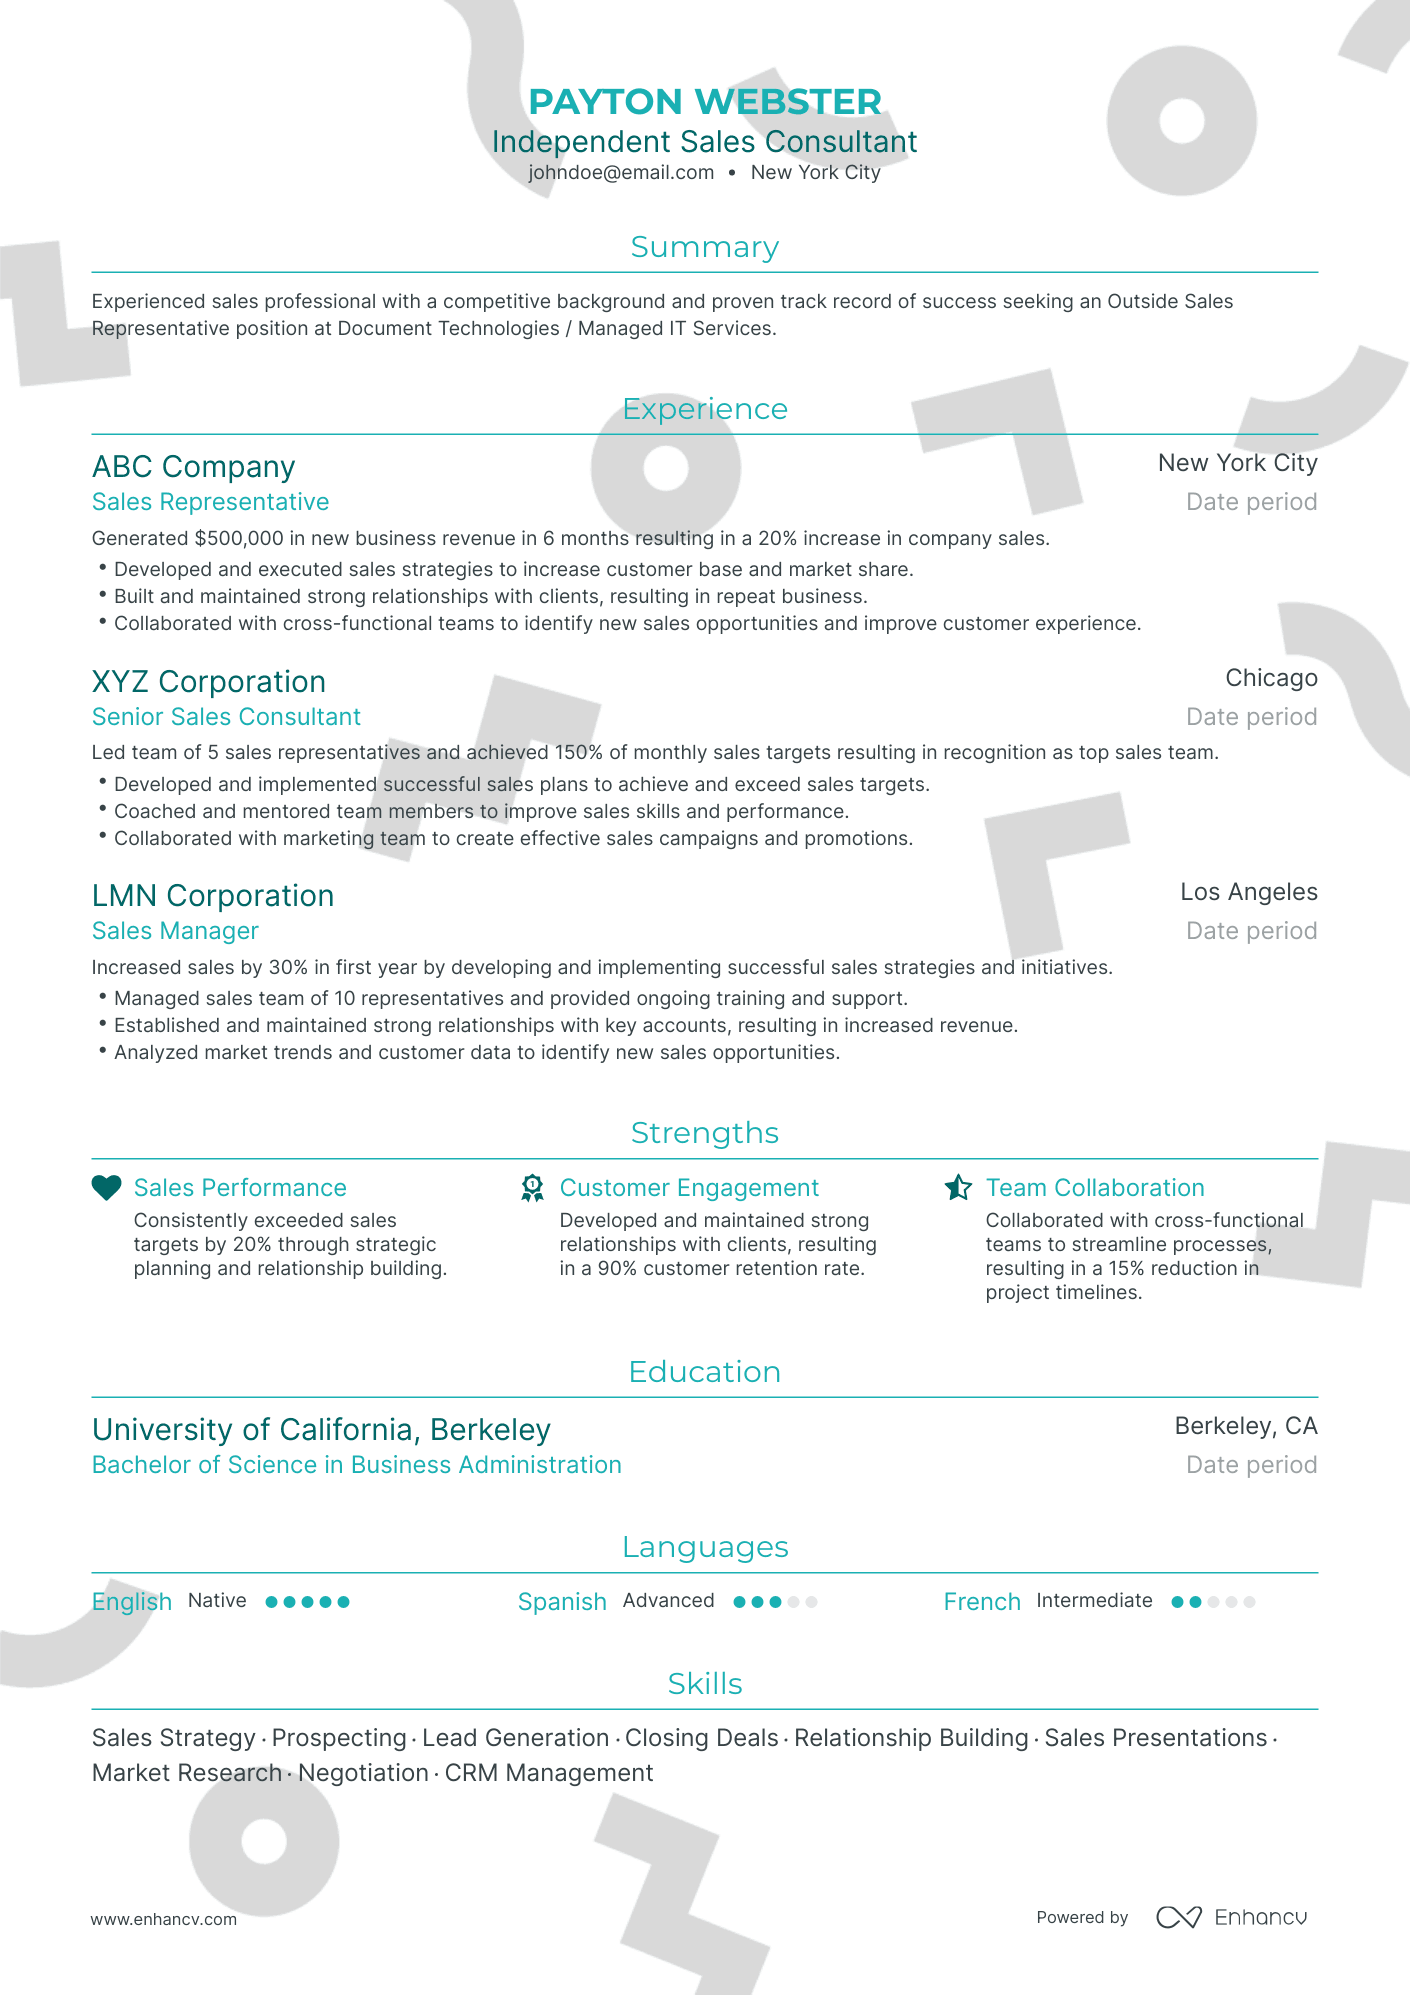 Traditional Independent Sales Consultant Resume Template